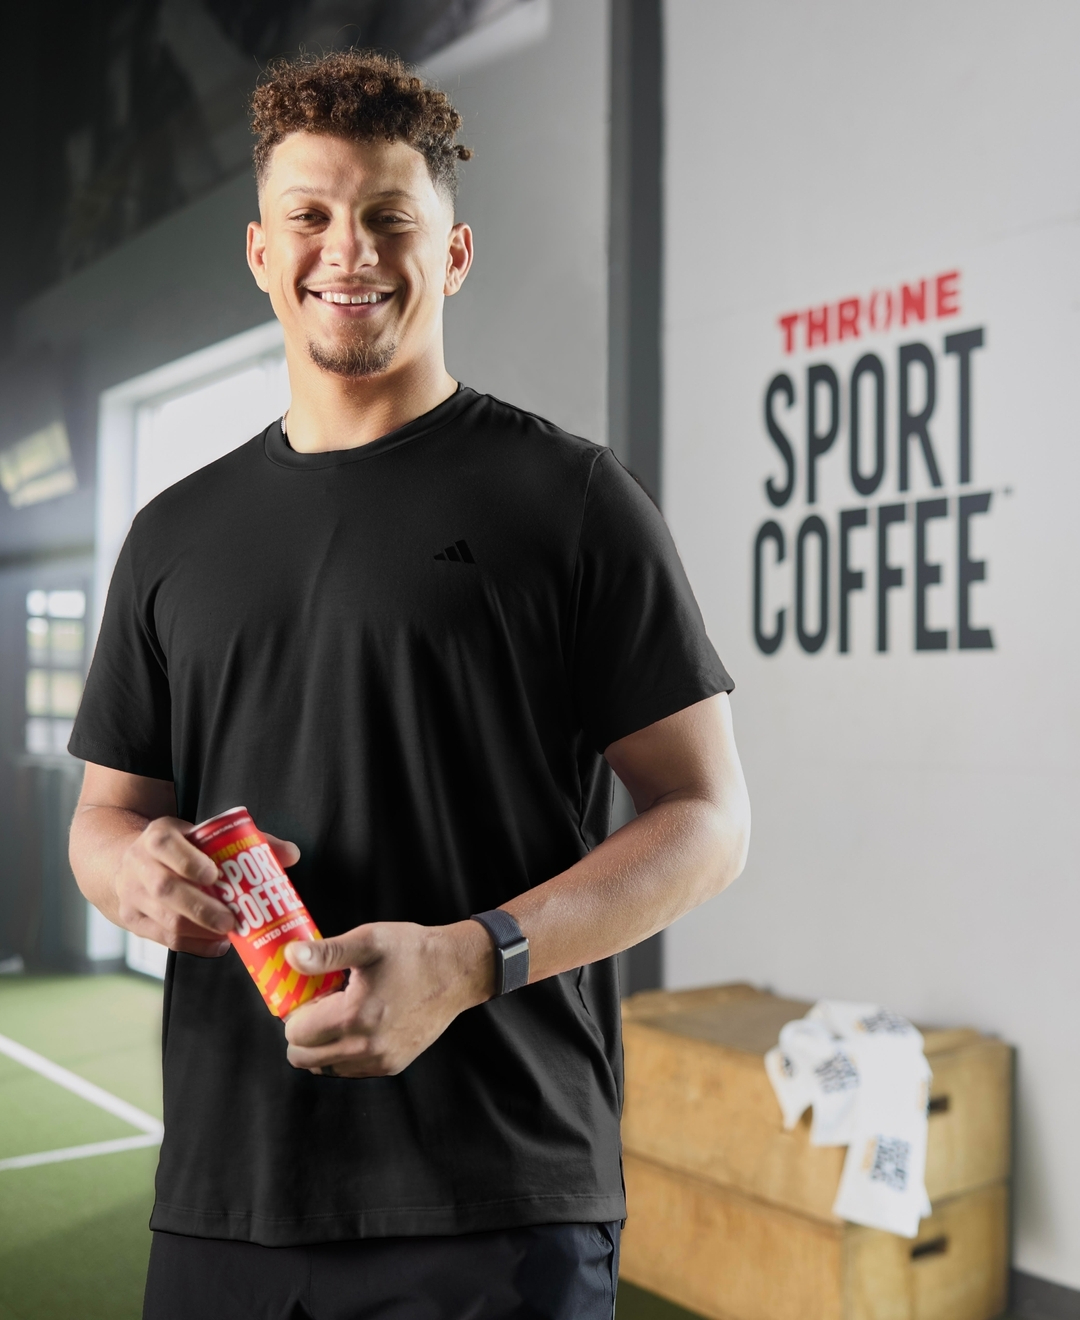 The 28-year-old revealed that he's launched a new iced coffee called Throne Sport Coffee